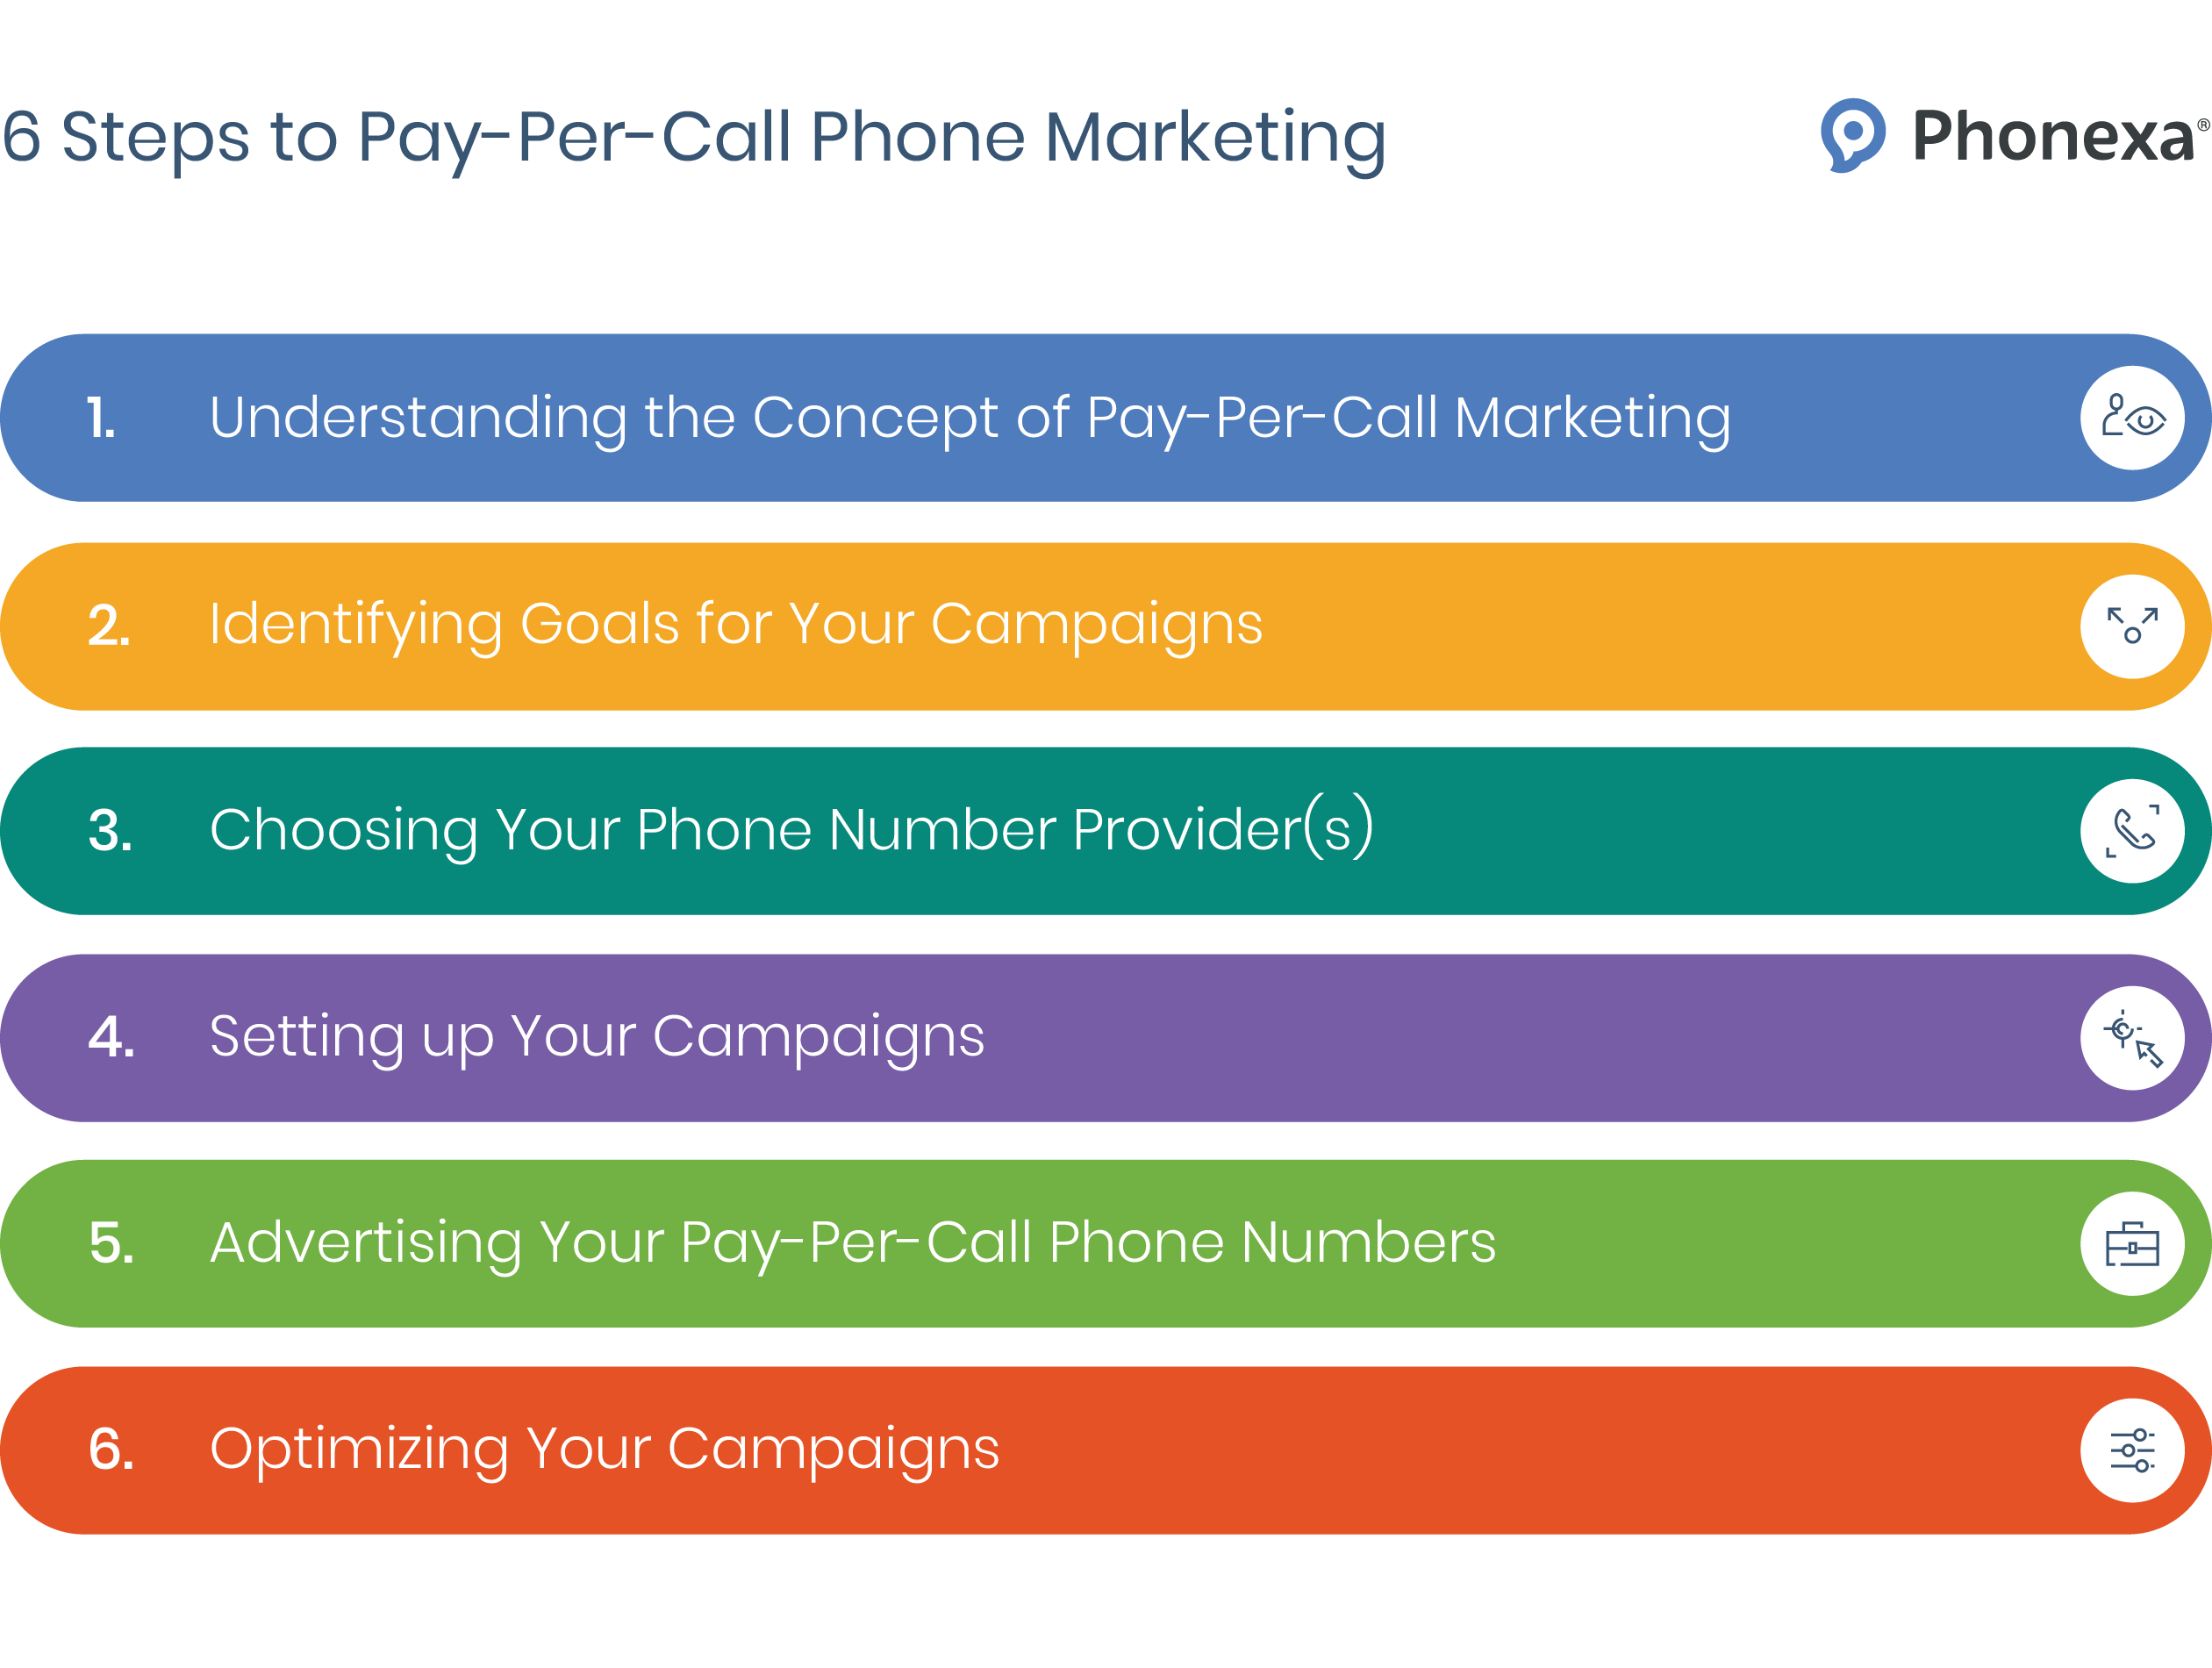 6 Steps to Pay-Per-Call Phone Marketing